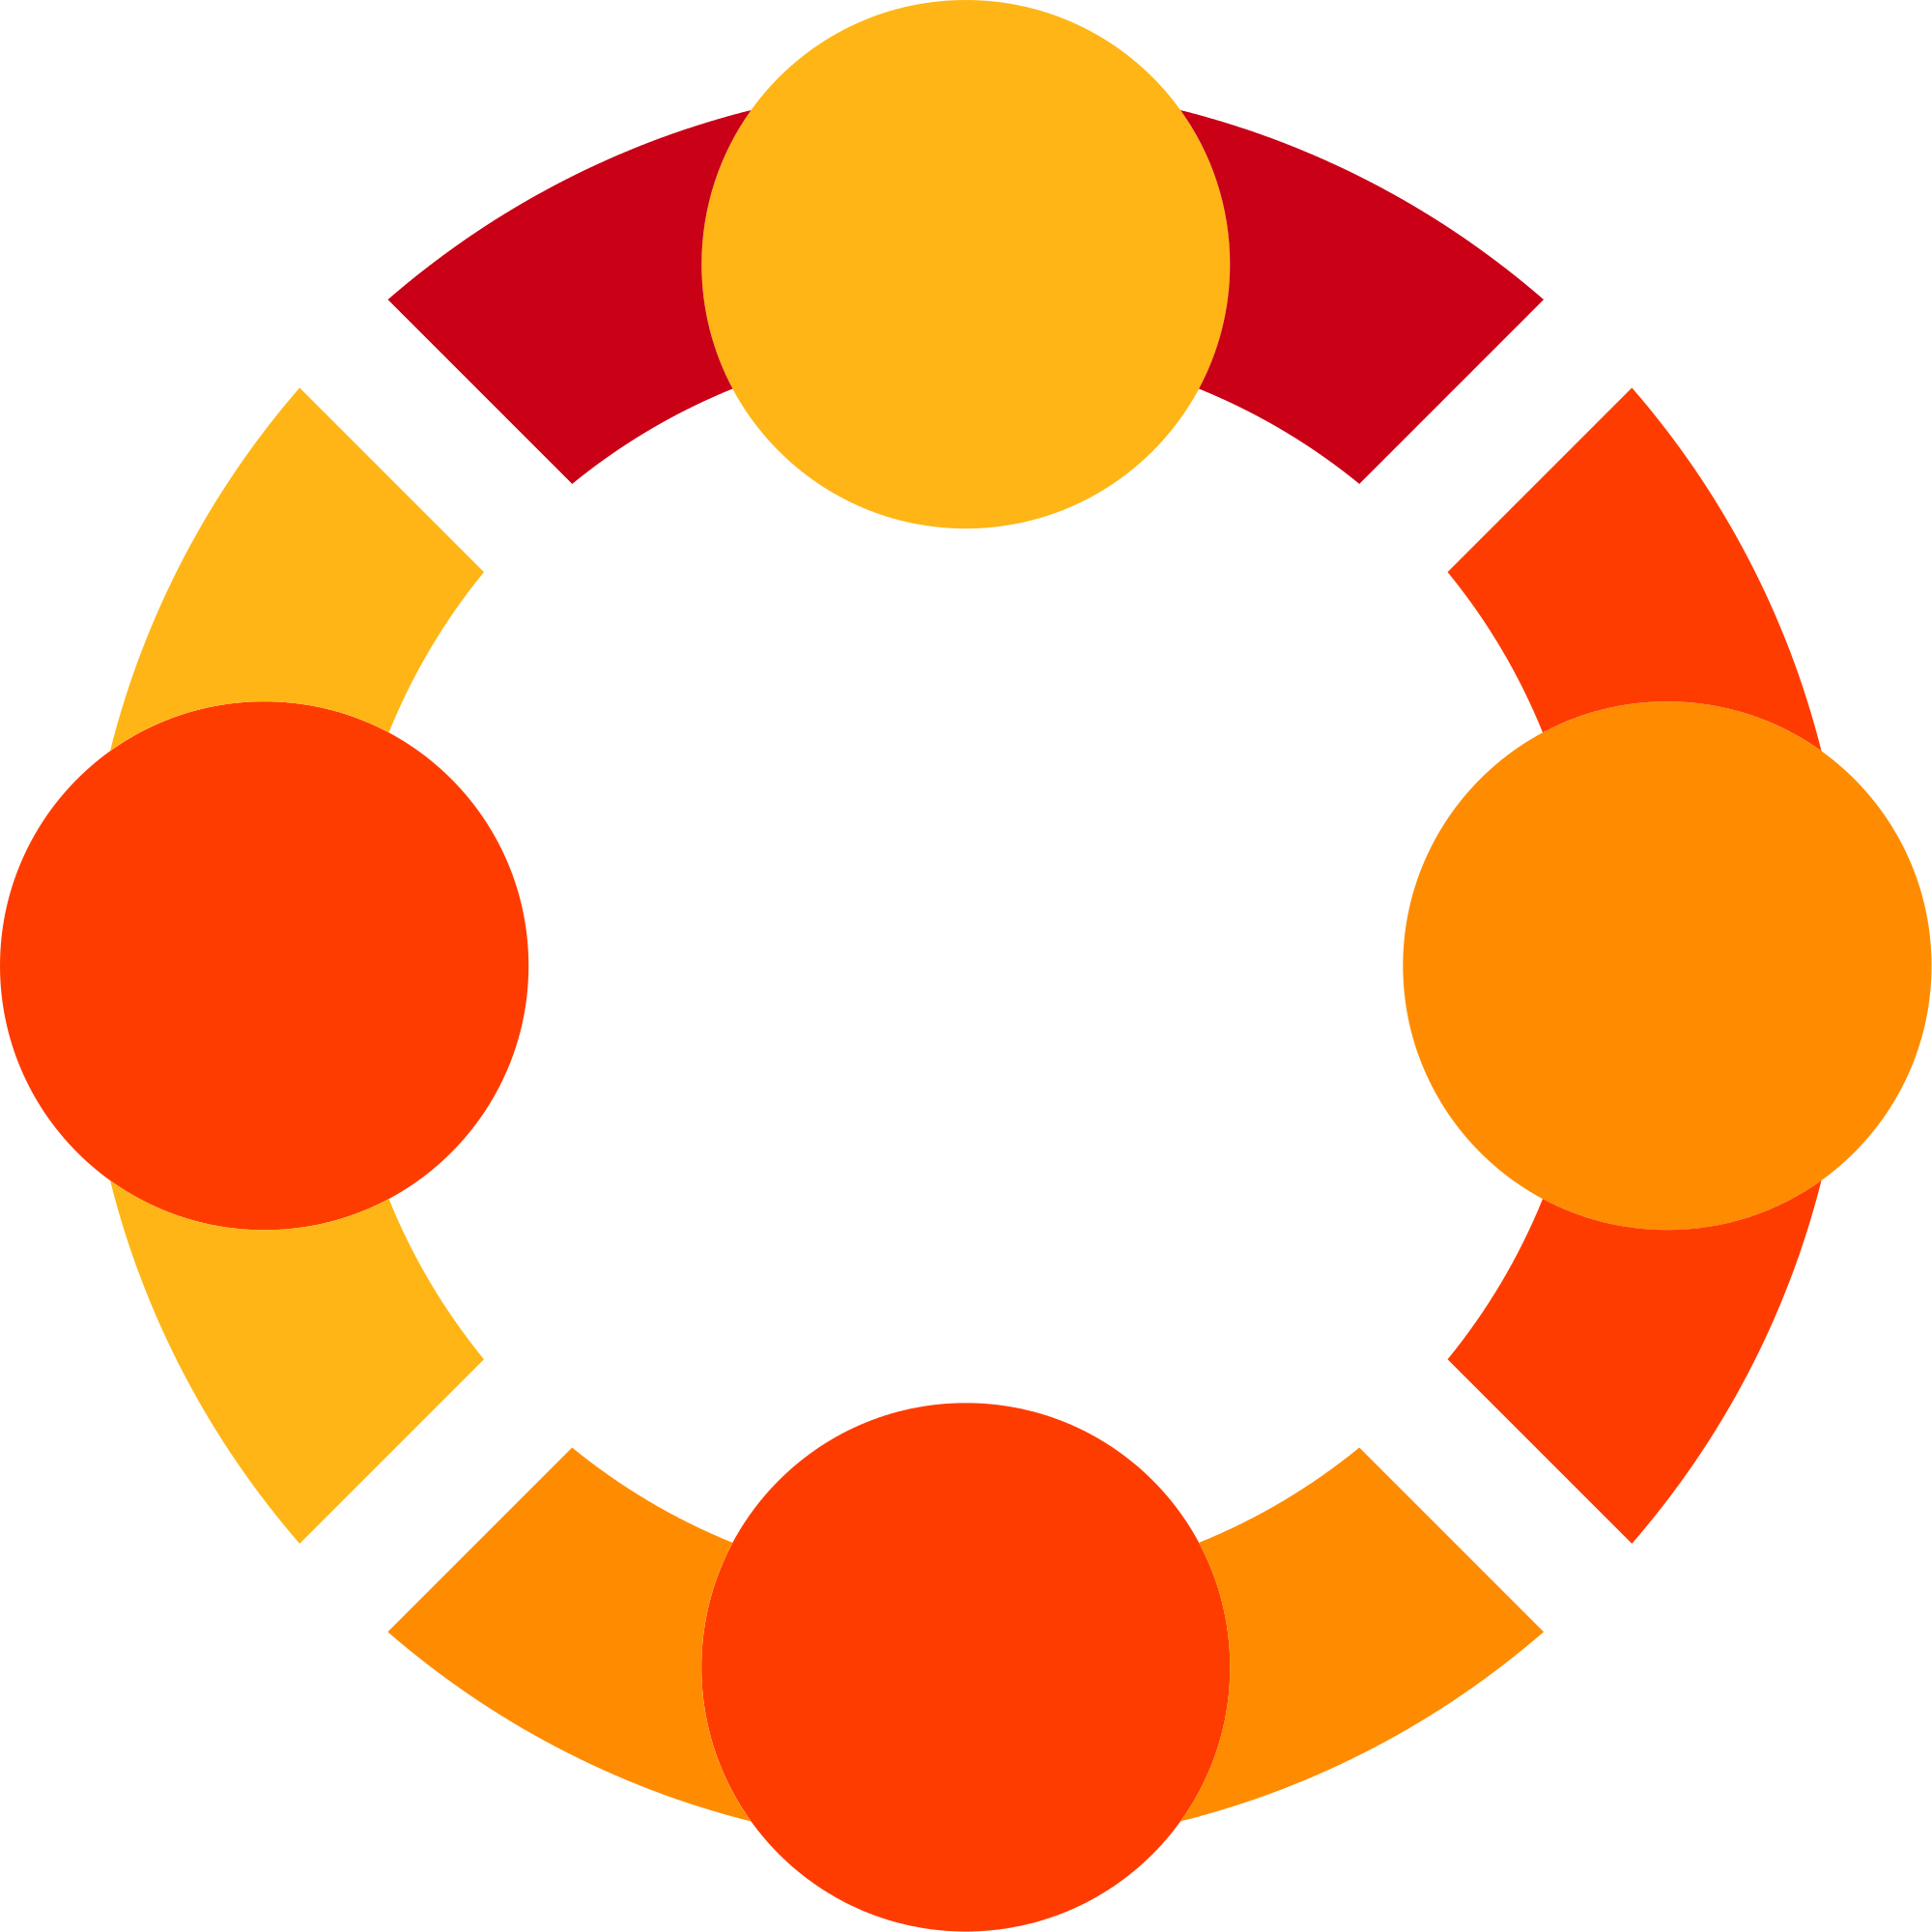 File Ubuntu Icon Pd2 Vector Svg Wikimedia Commons Rh - Scalable Vector Graphics (2000x2000)